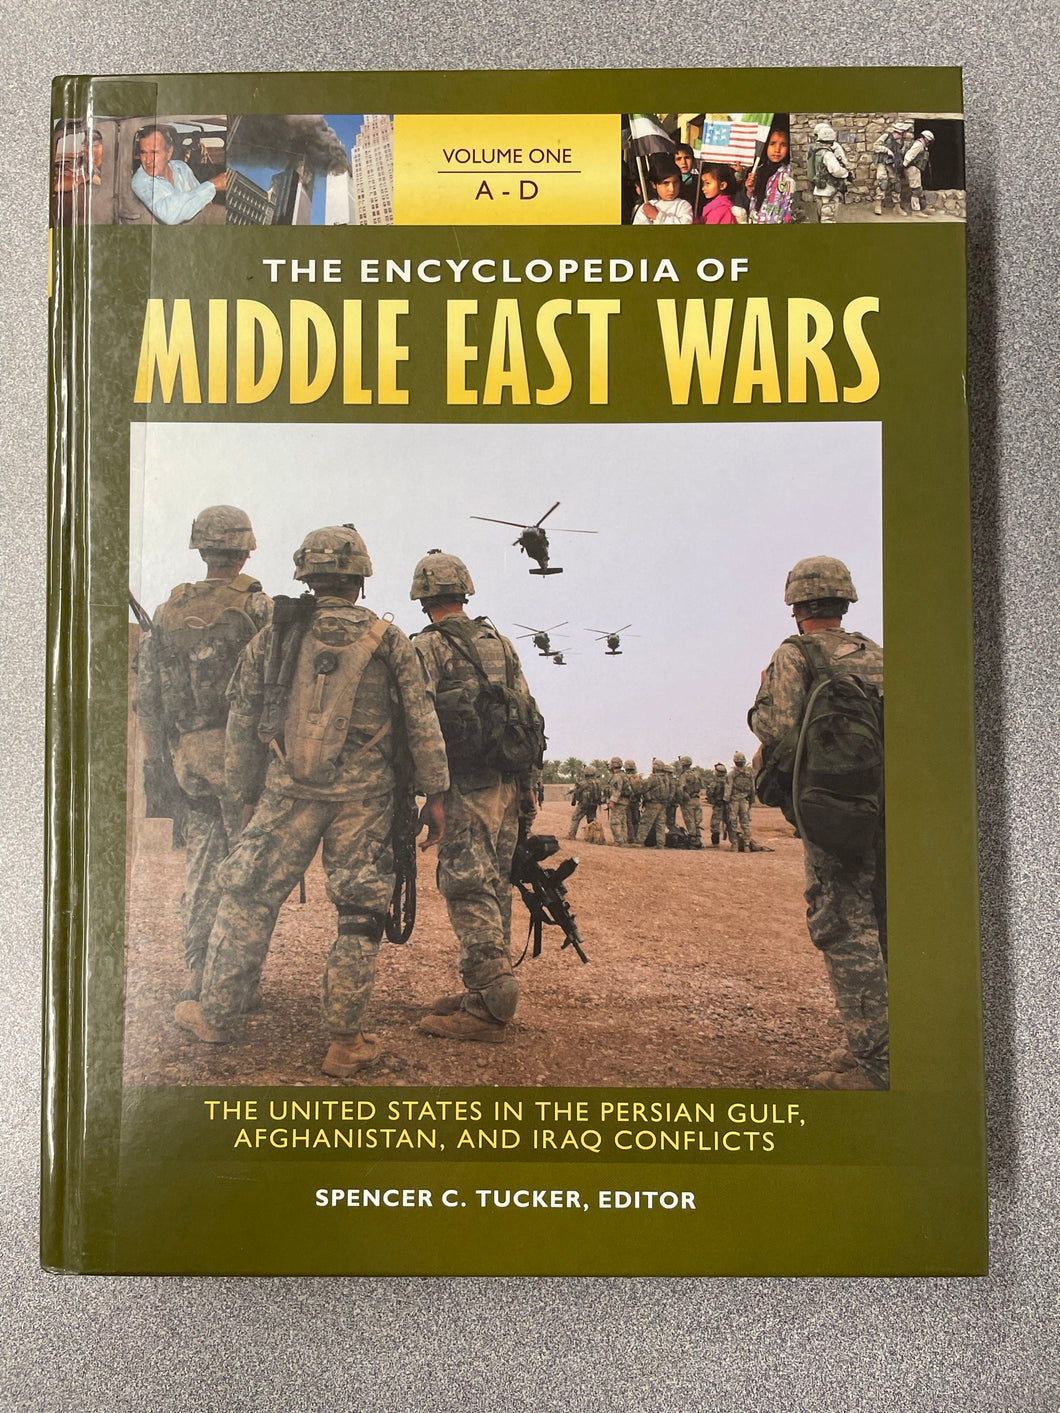 The Encyclopedia of Middle East Wars: the United States in the Persian Gulf, Afghanistan, and Iraq Conflicts, Tucker, Spencer C., ed. [2010] SS 6/23